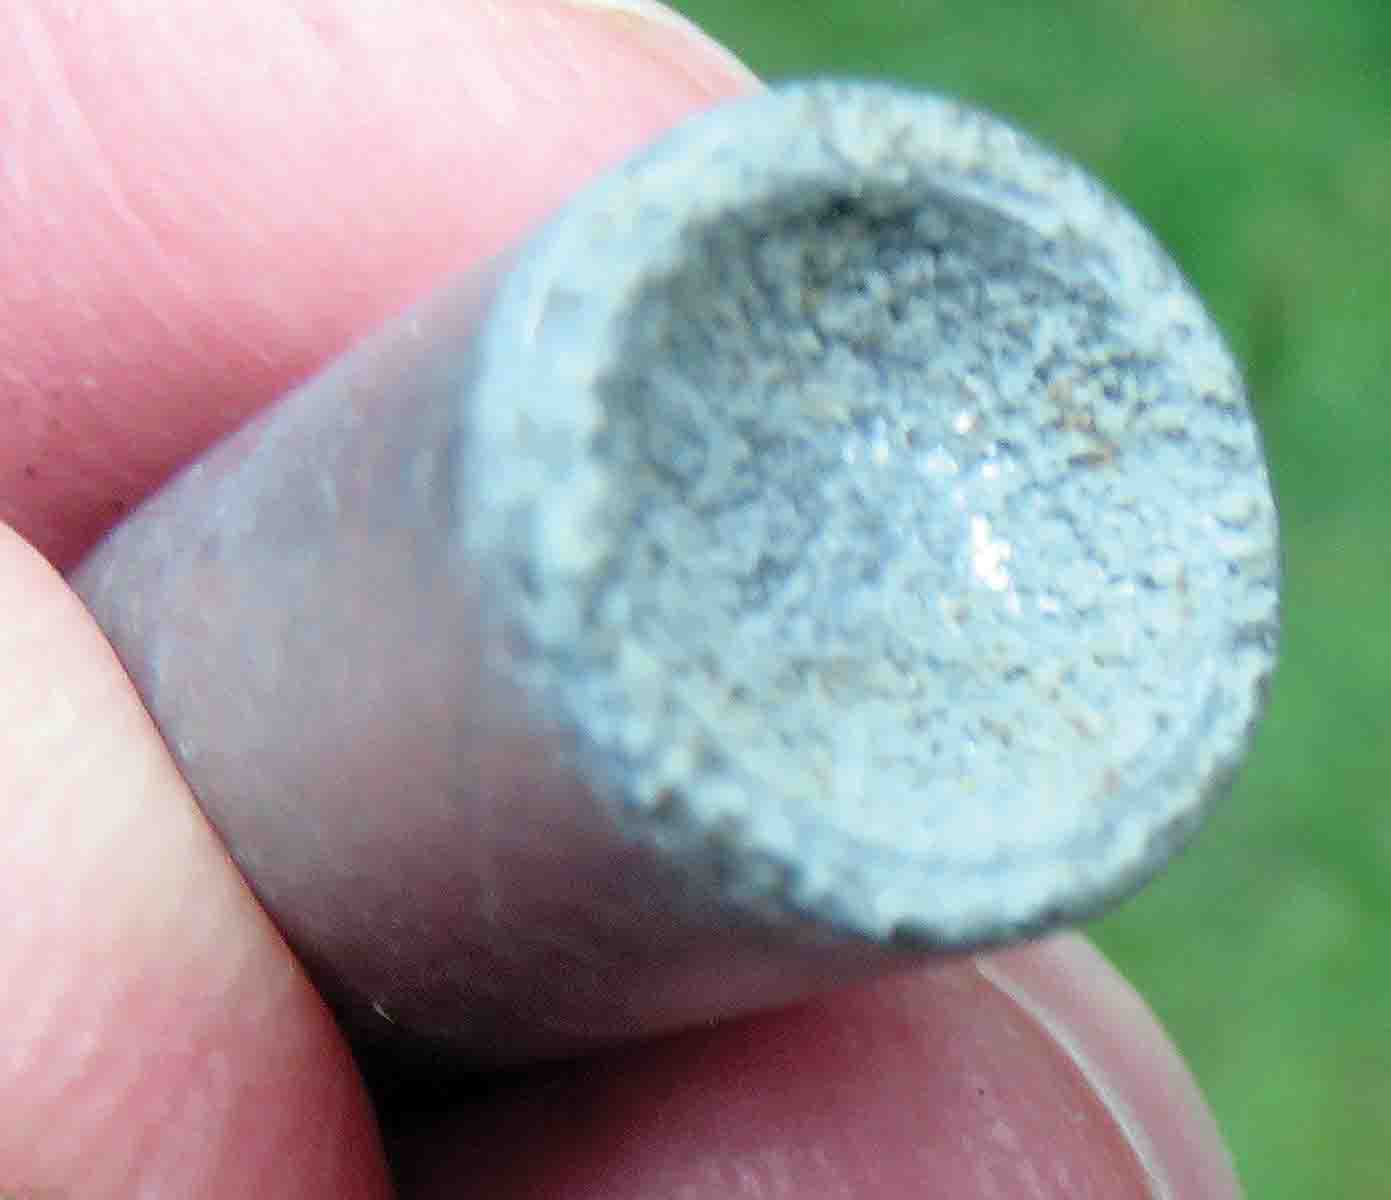 The deep cup base of the .44 bullet, showing its age.